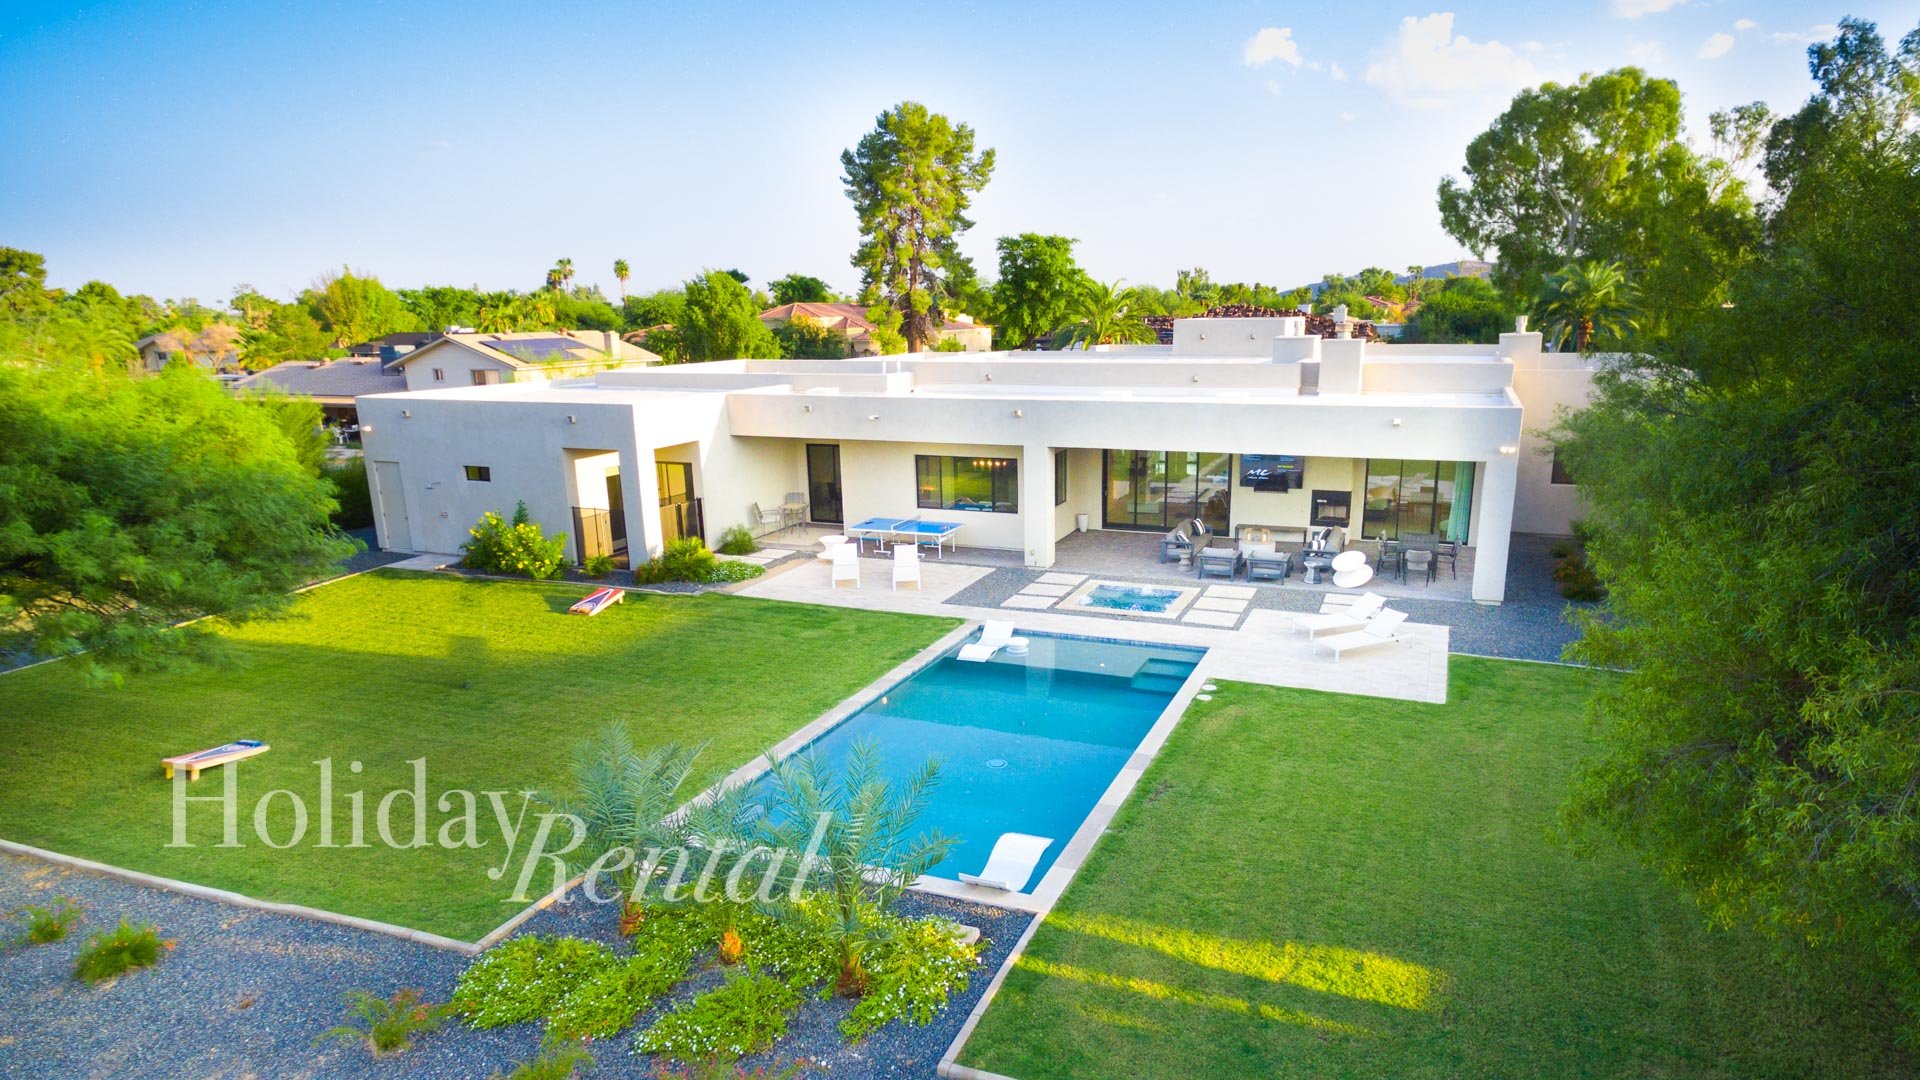 A birds-eye view of the backyard paradise, with a lush grassy area for play, a sparkling pool and spa for relaxation, a ping pong table for friendly competition, a comfortable couch seating area for l